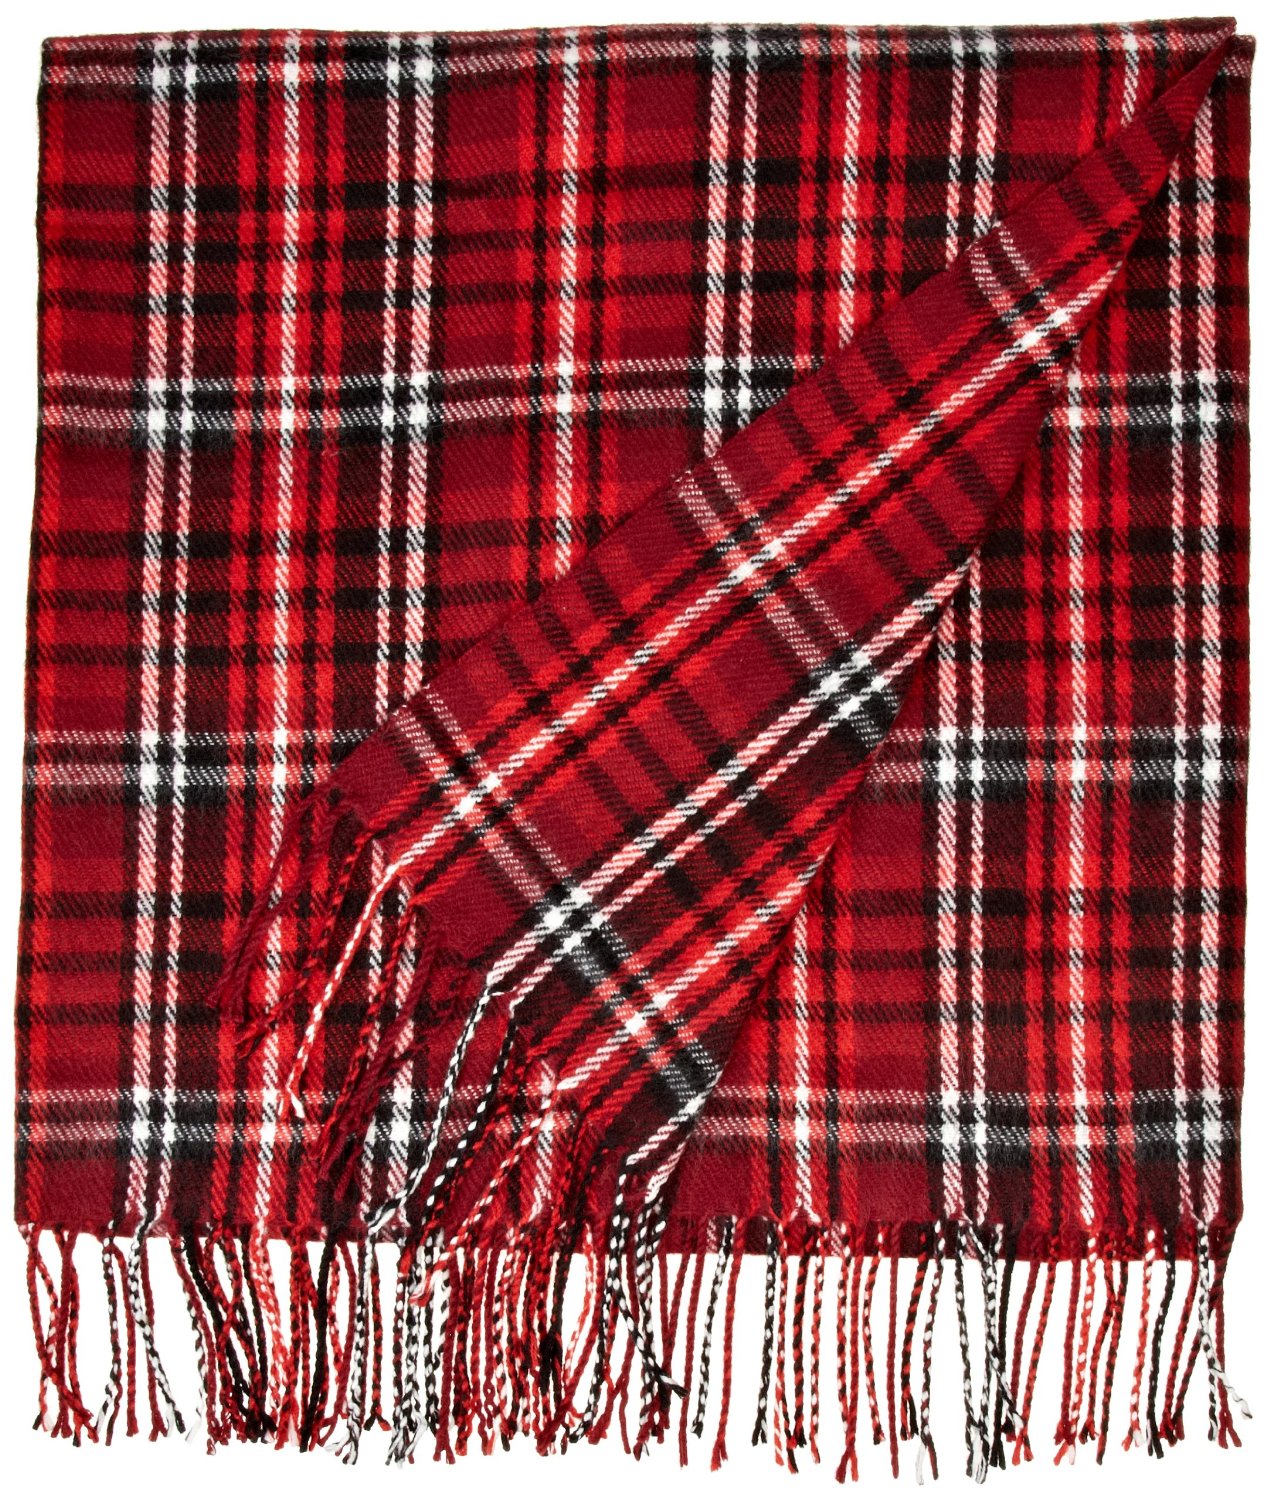 You'll love this stunning red plaid throw from Amazon it's the perfect way to add some warmth to your decor this fall and winter affiliate link